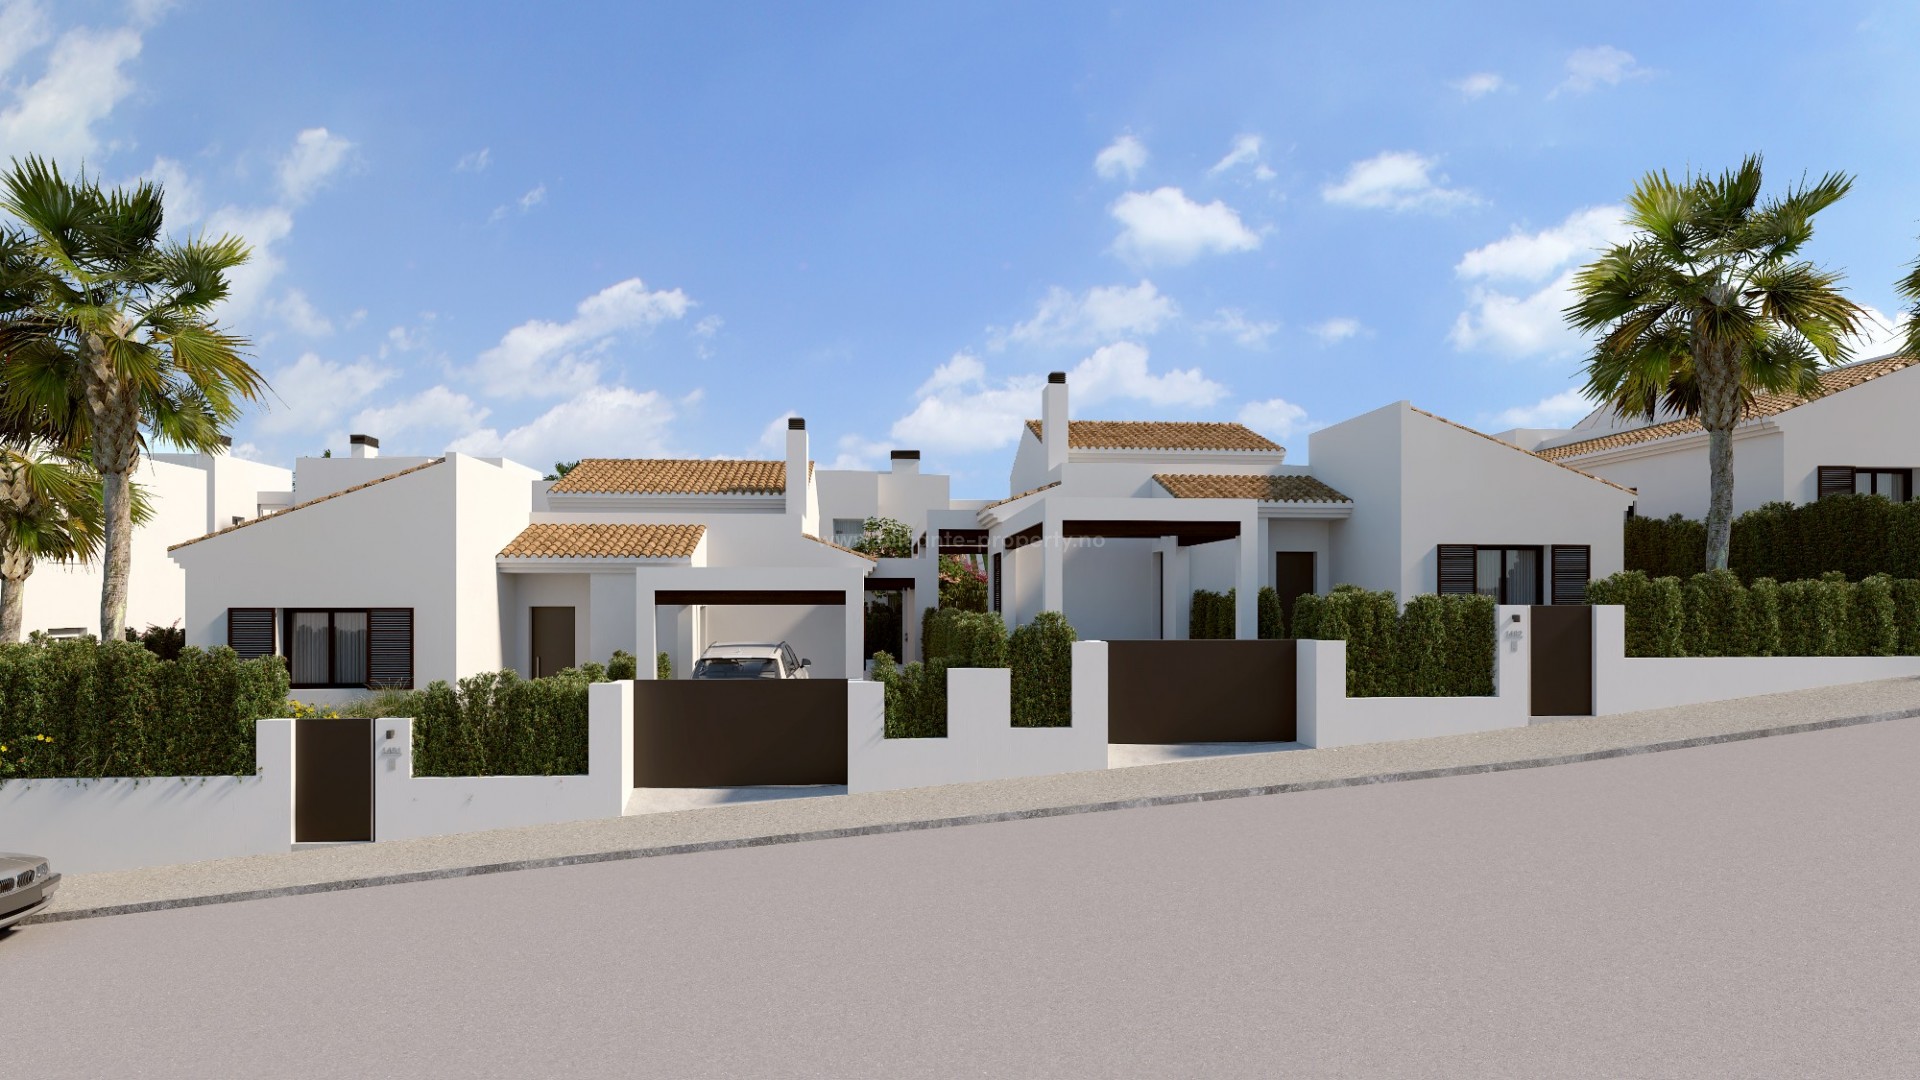 Houses/Villas at La Finca Golf Resort, 3 bedrooms, 2 bathrooms, private garden with swimming pool, large terrace, a pergola for parking